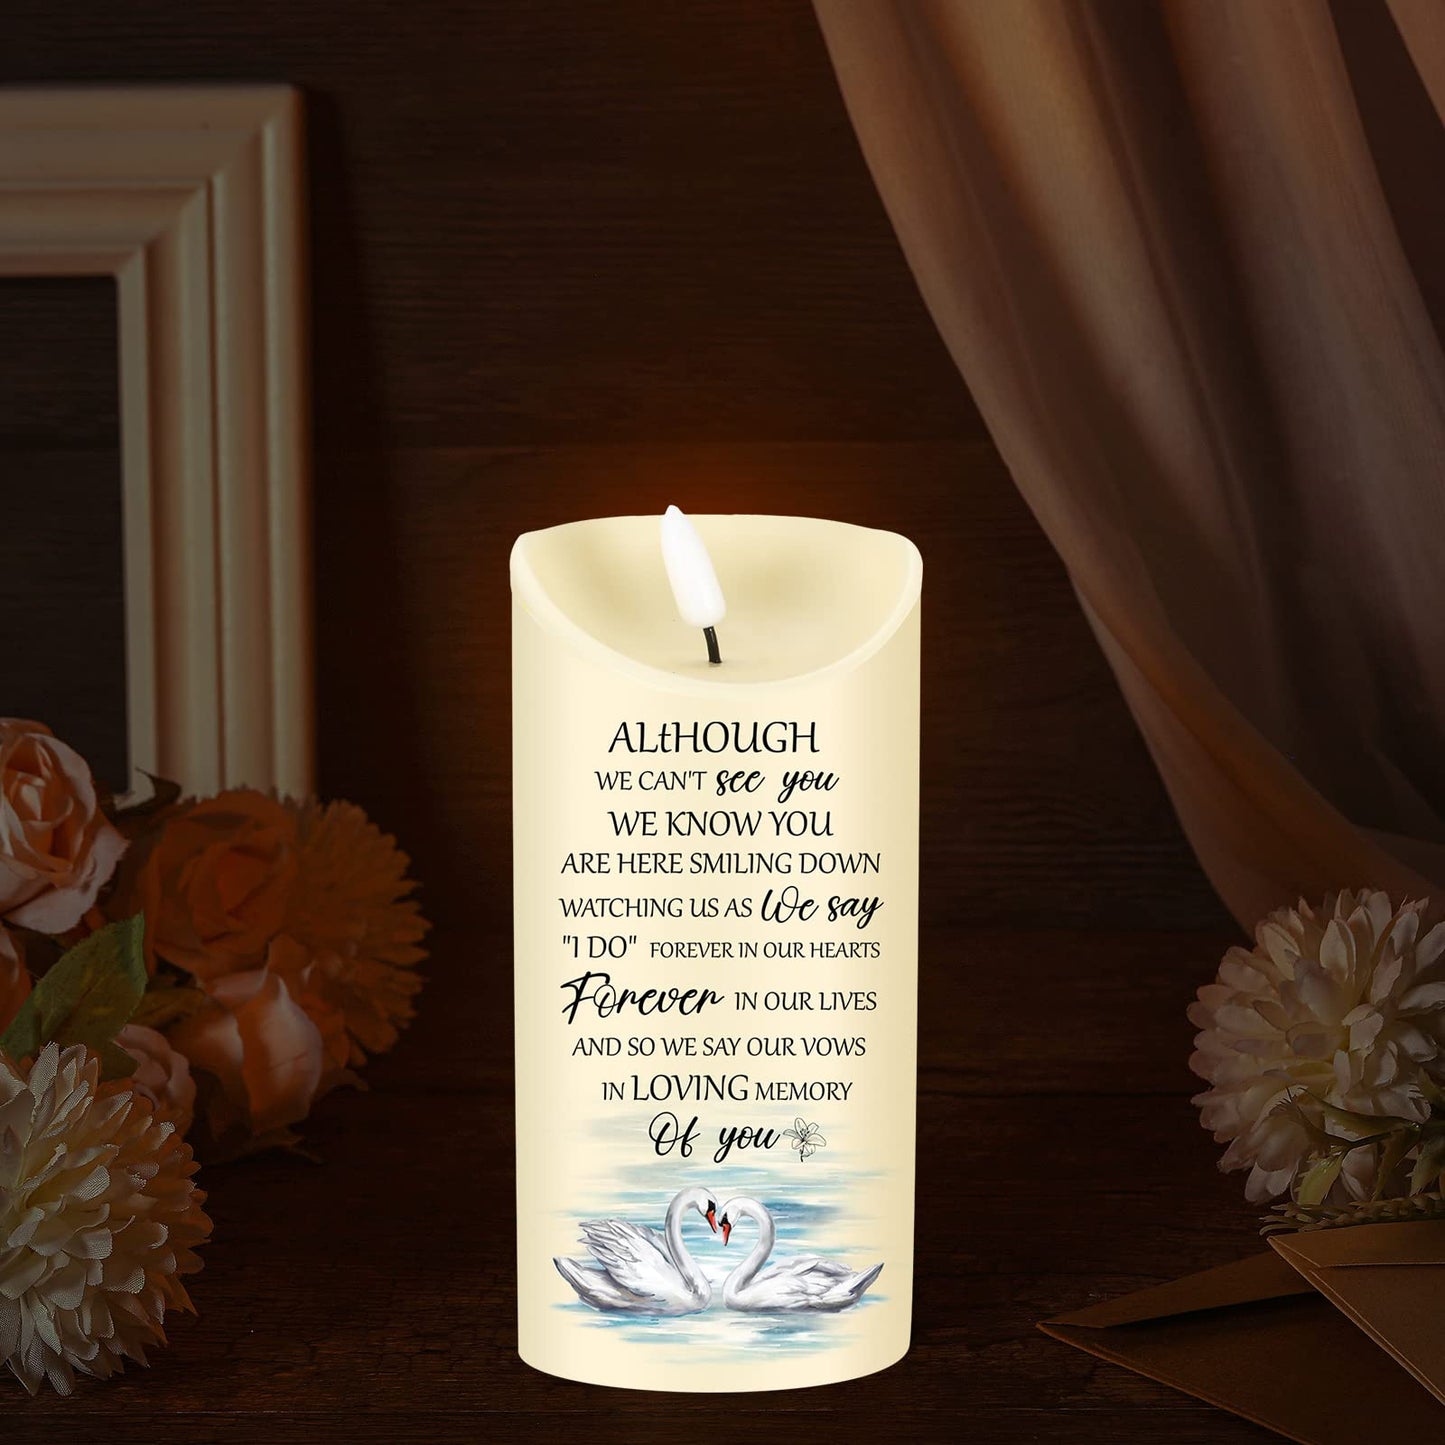 Wedding Memorial Gifts Led Flameless Candles Flickering Sympathy Candle Pillar Memory Loved One Wedding Memorial Candles Funeral Bereavement Candle Thoughtful, 3 x 6 Inches (Swan)